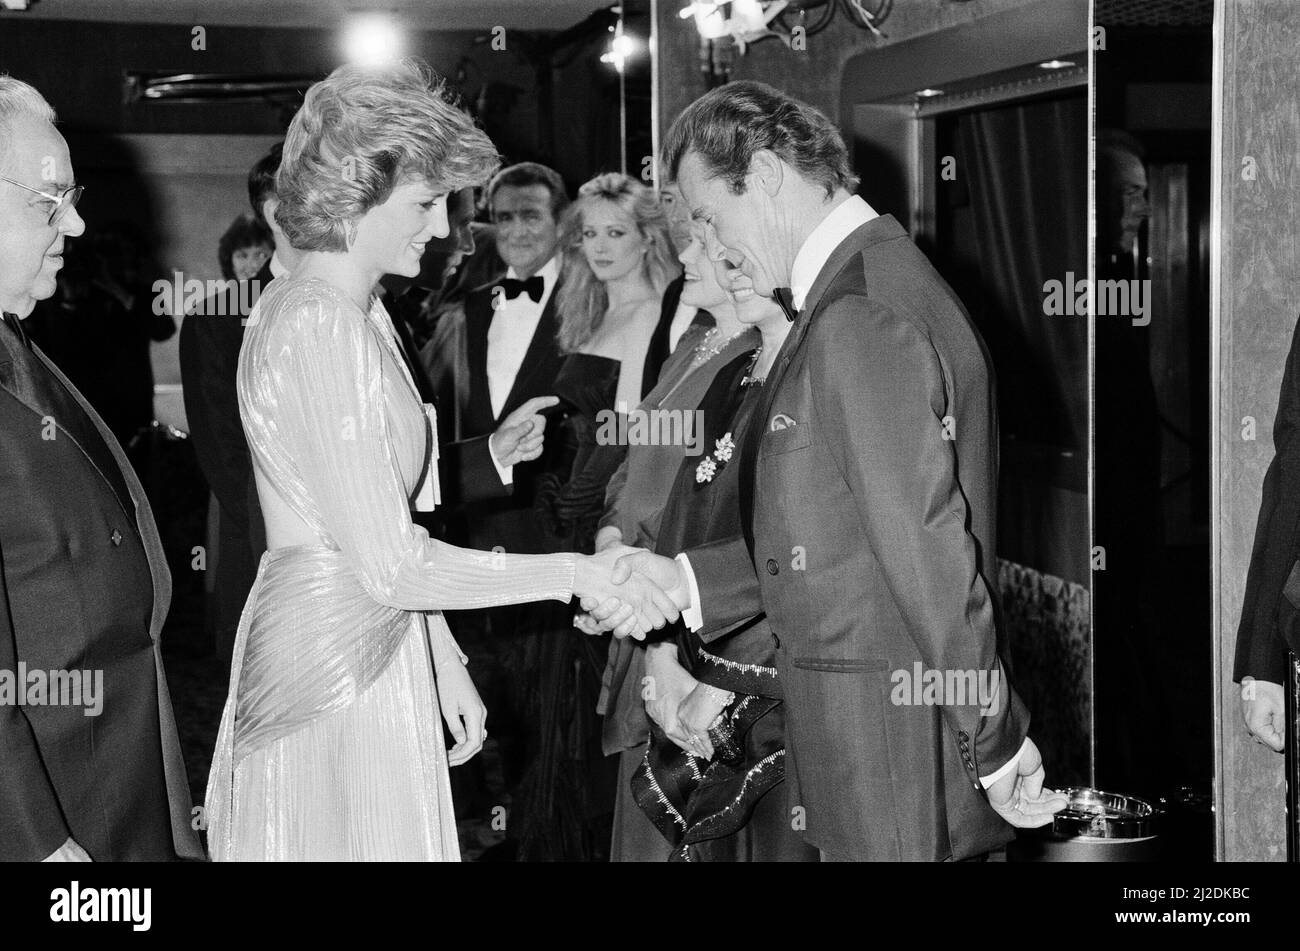 HRH The Princess of Wales, Princess Diana greets lead actor Roger Moore at The Royal Premiere of the 14th 007 James Bond Movie, 'A View To A Kill'  at the Odeon Cinema, Leicester Square, London. Roger bows and they shake hands.  This was Roger Moore's last of seven Bond Films. His first 'Live and Let Die', was released in 1973.  Princess Diana wears a stunning silver Bruce Oldfield dress.   In the background is actor Patrick Macnee, who plays Sir Godfrey Tibbett in the film.  Picture taken 14th June 1985 Stock Photo